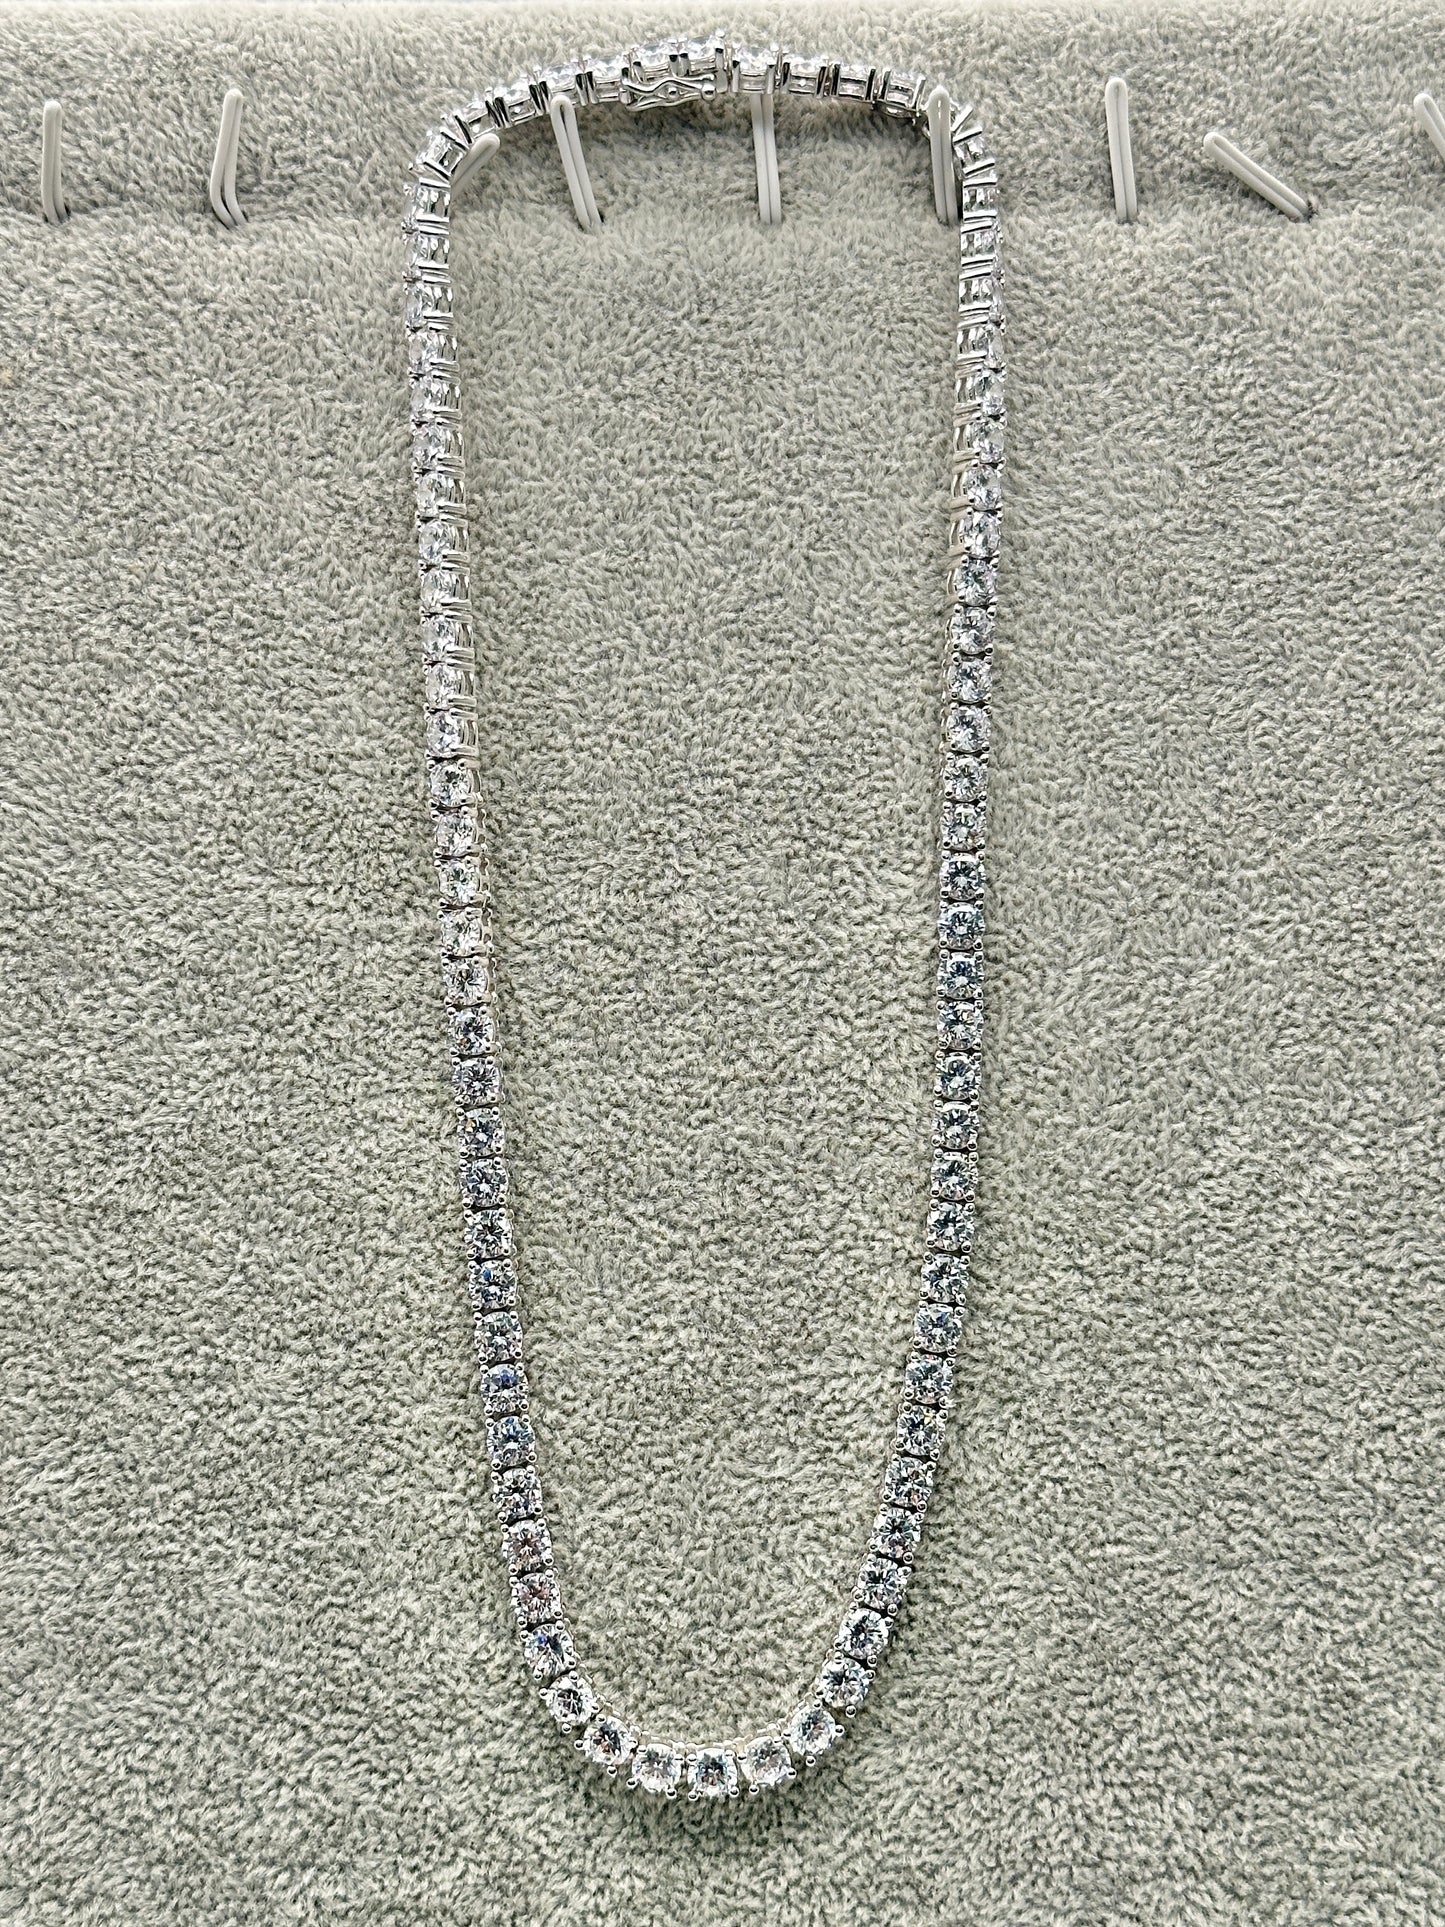 Carat London Metallic Prudence Necklace White Gold Plated 45cm One Size